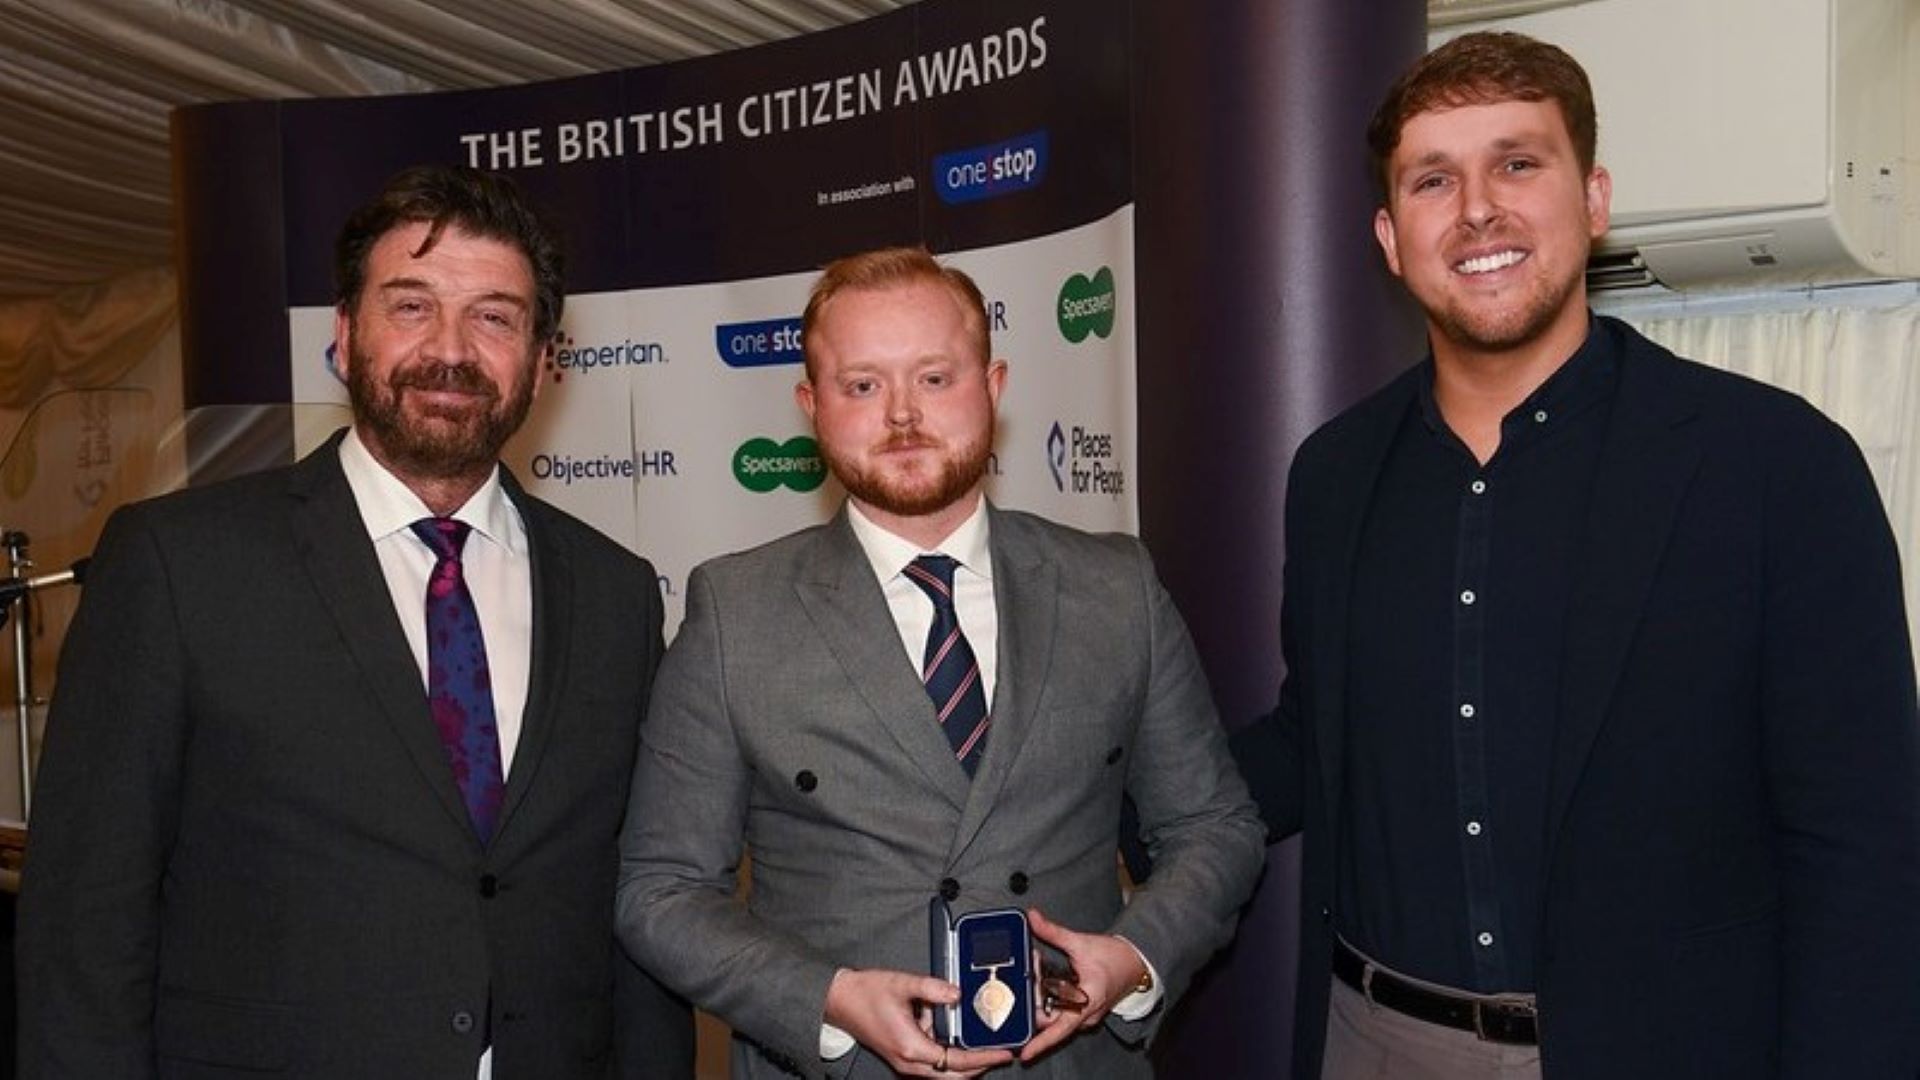 A picture of Travis Frain next to Nick Knowles receiving his British Citizen Award.